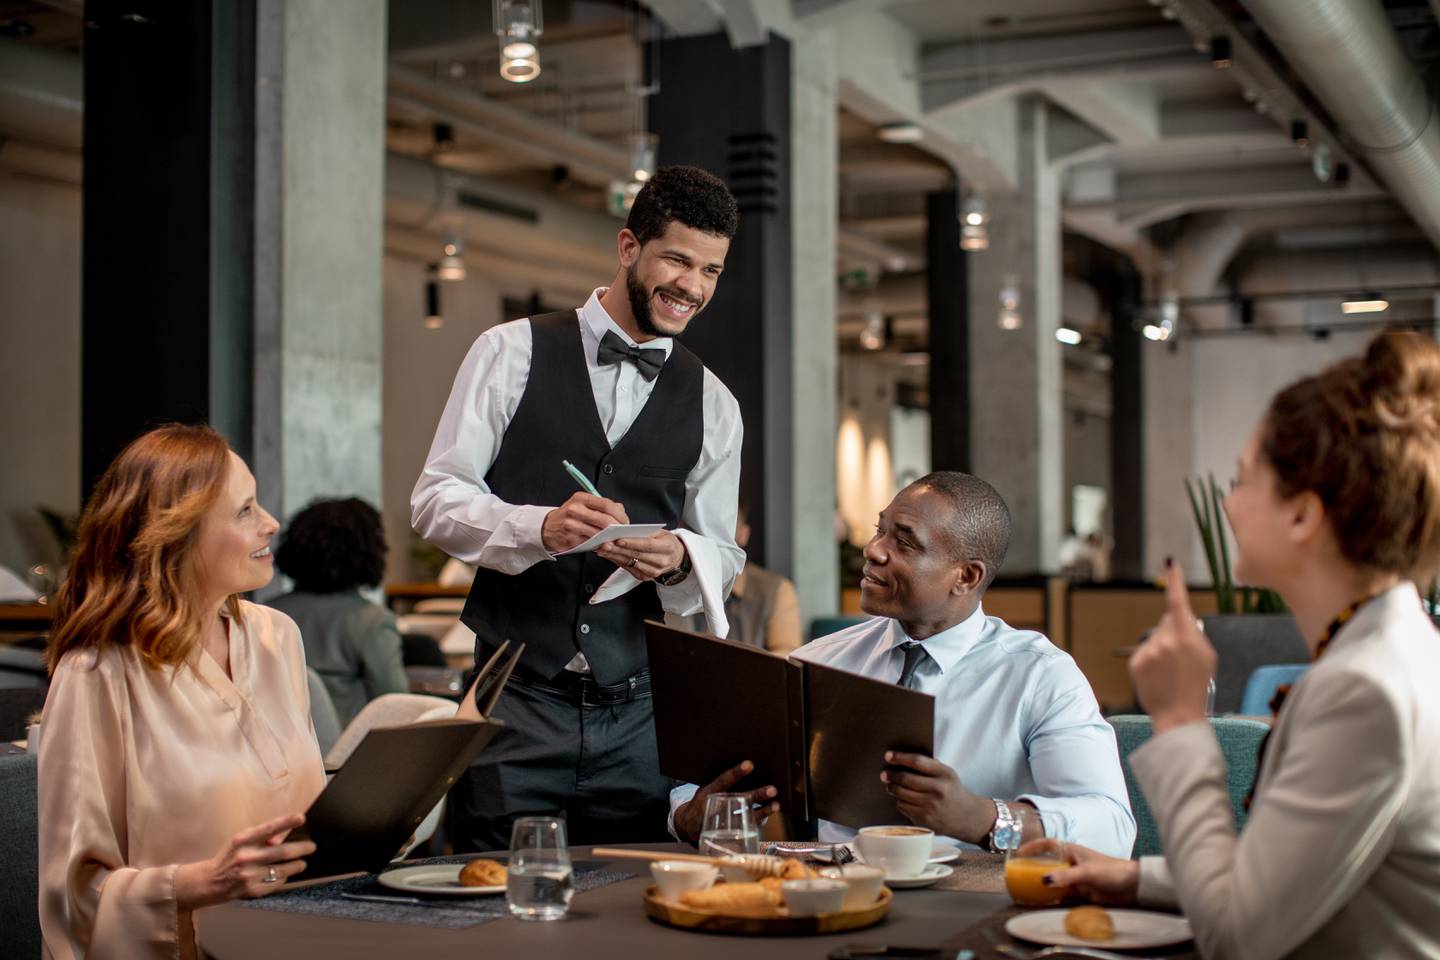 Close up of a waiter taking a order from group of people dining in a restaurant.